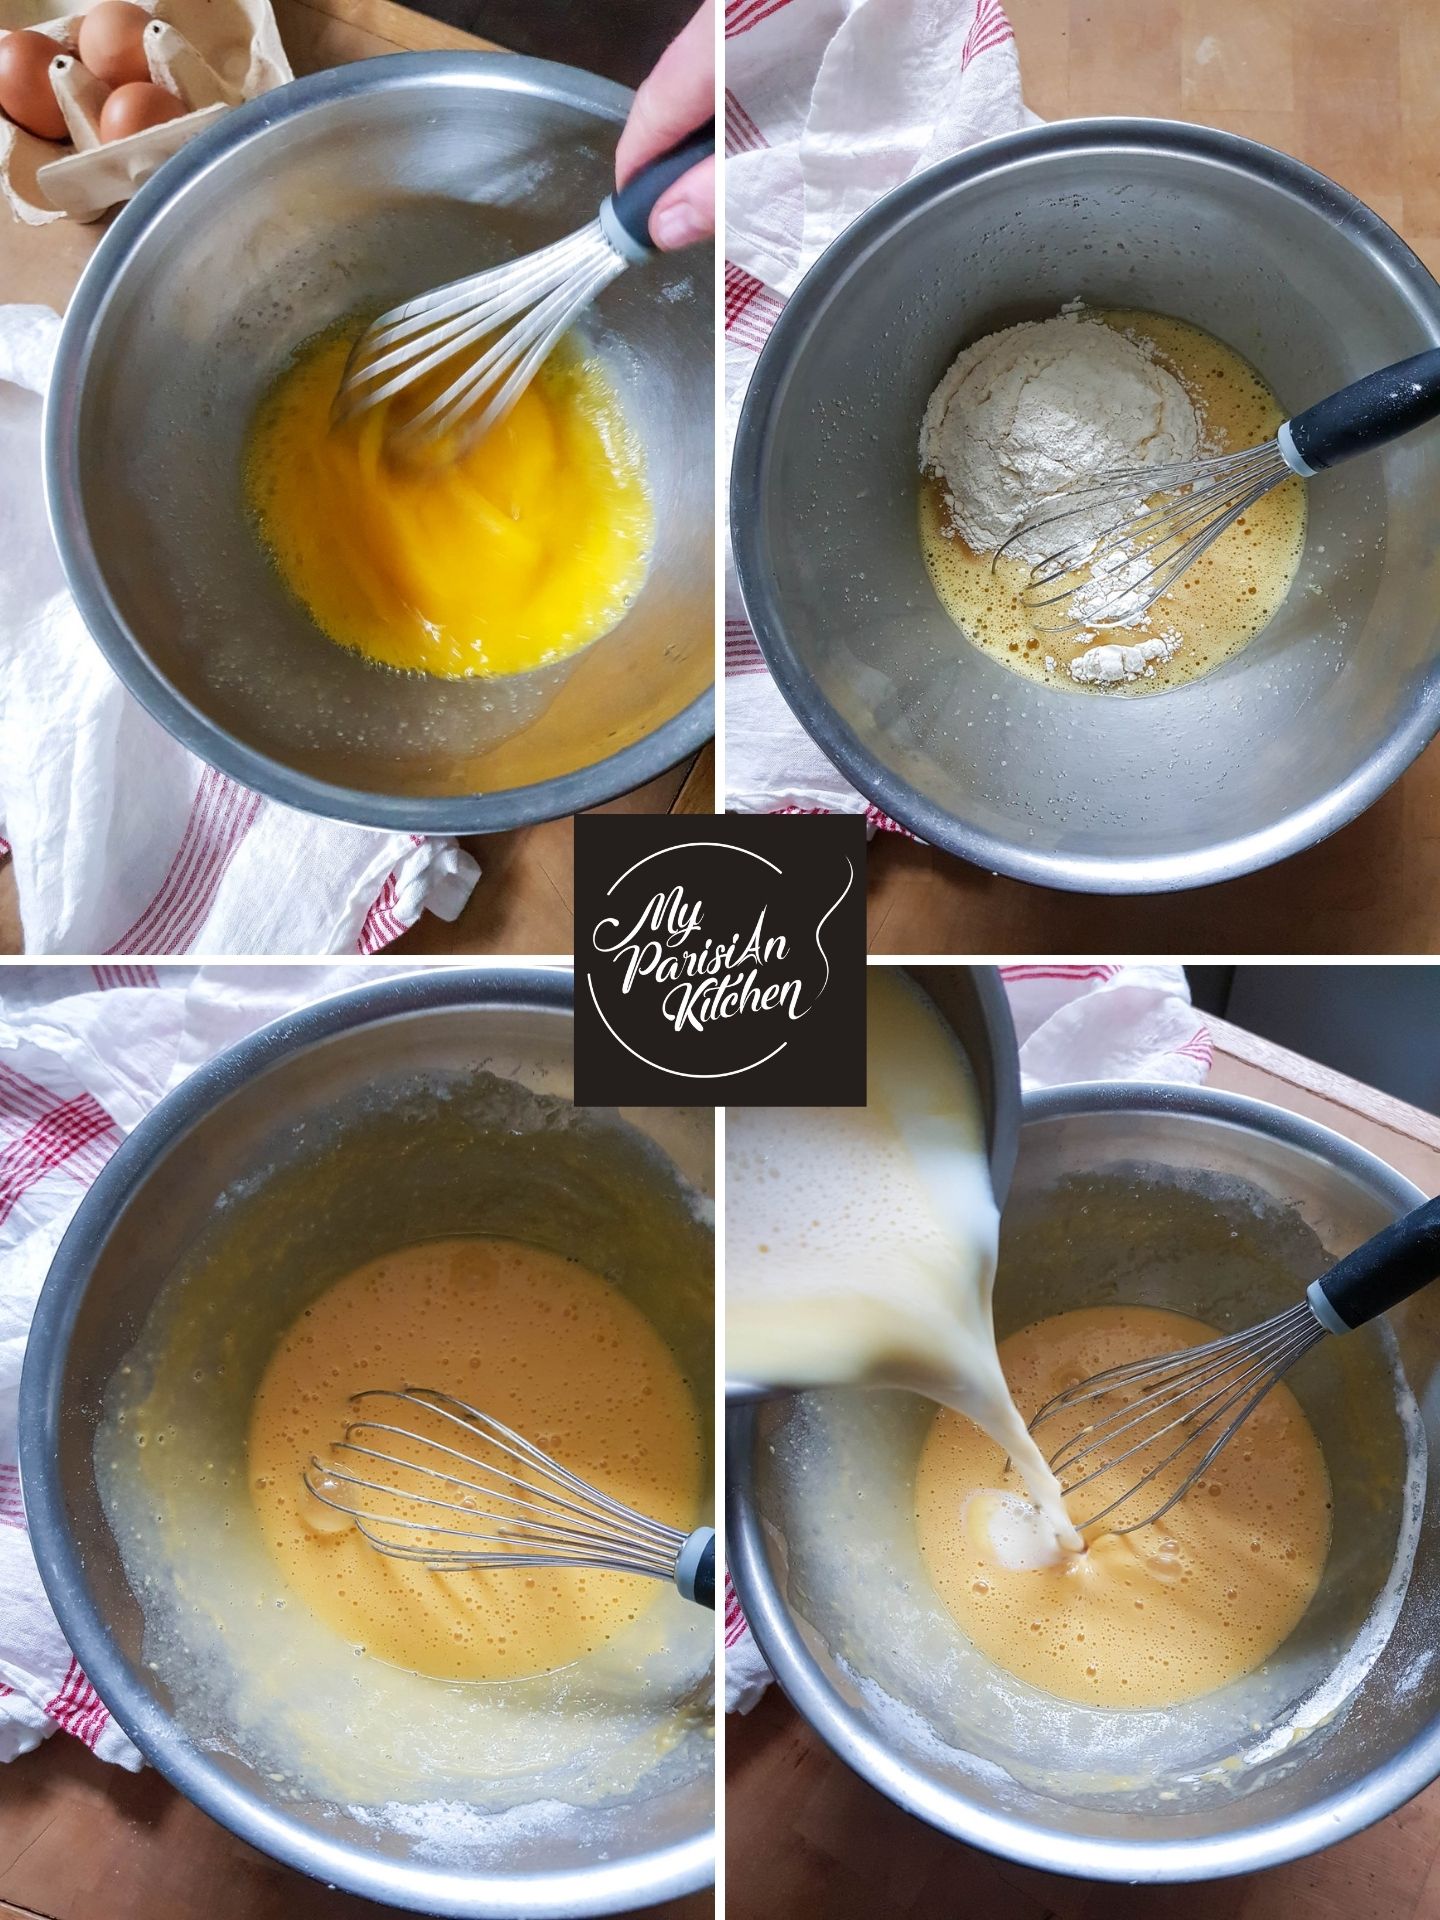 prepare the batter for the clafoutis